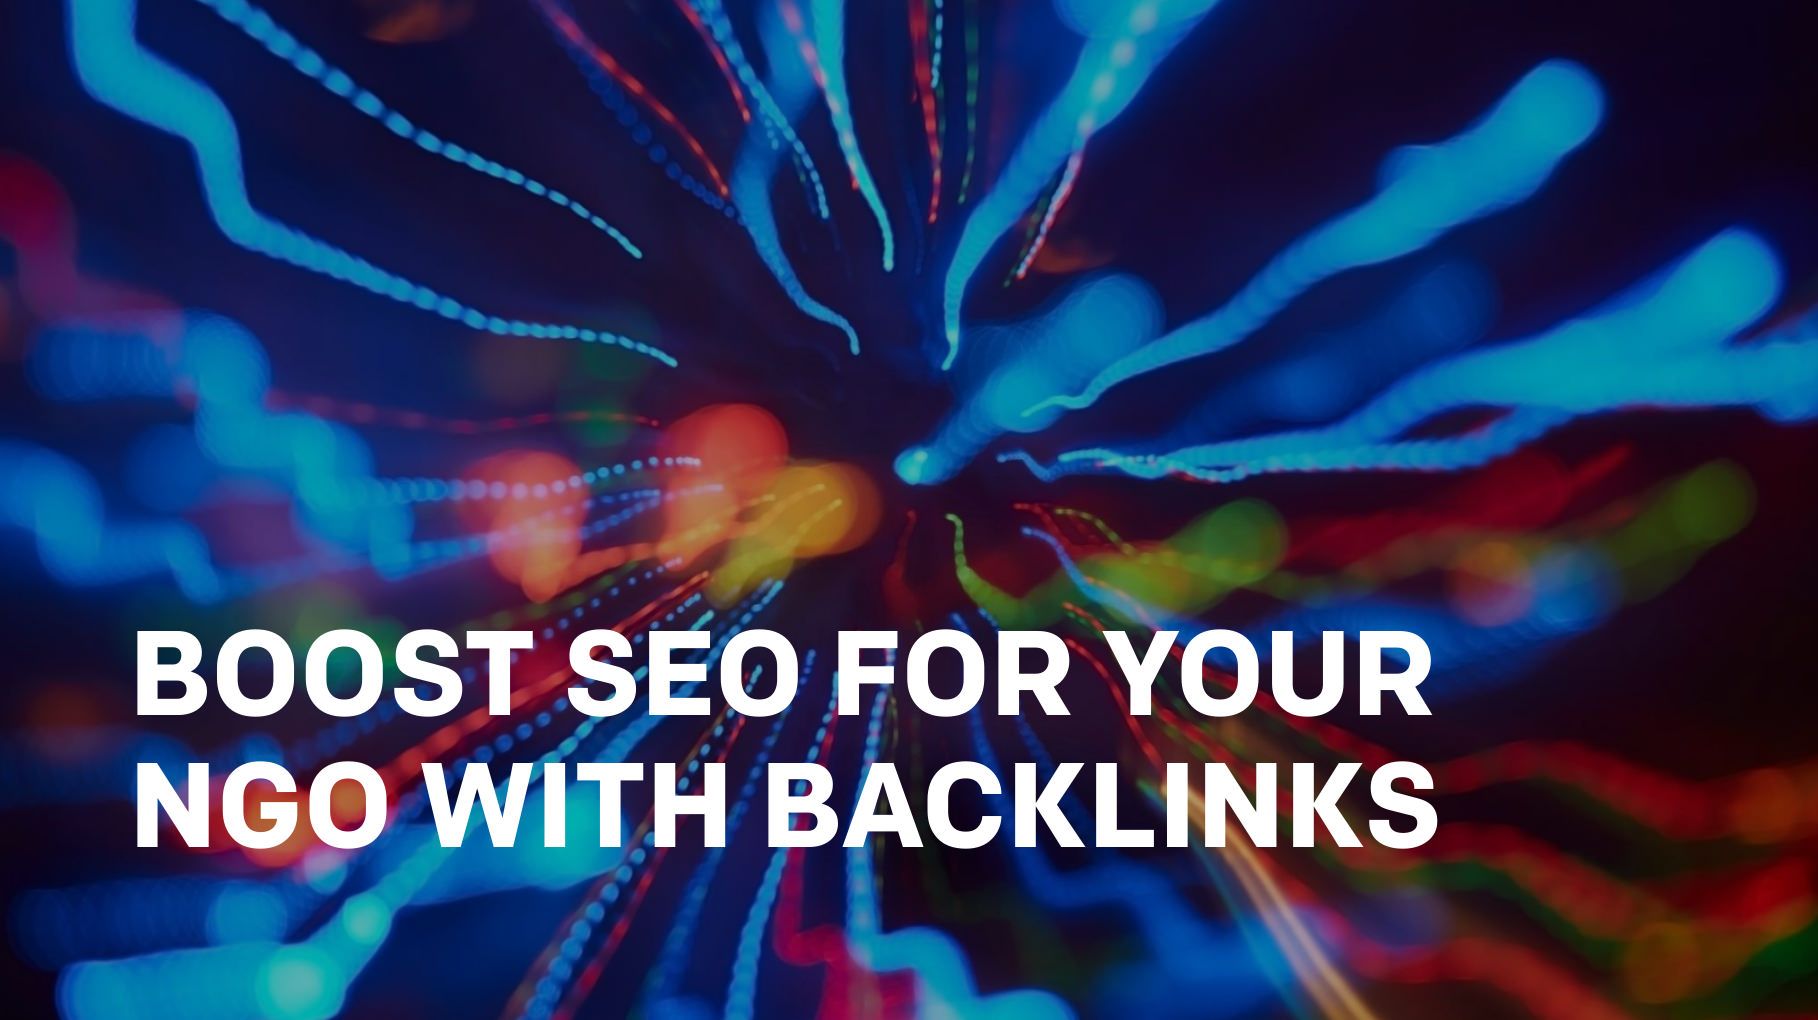 How to boost SEO for your NGO with backlinks